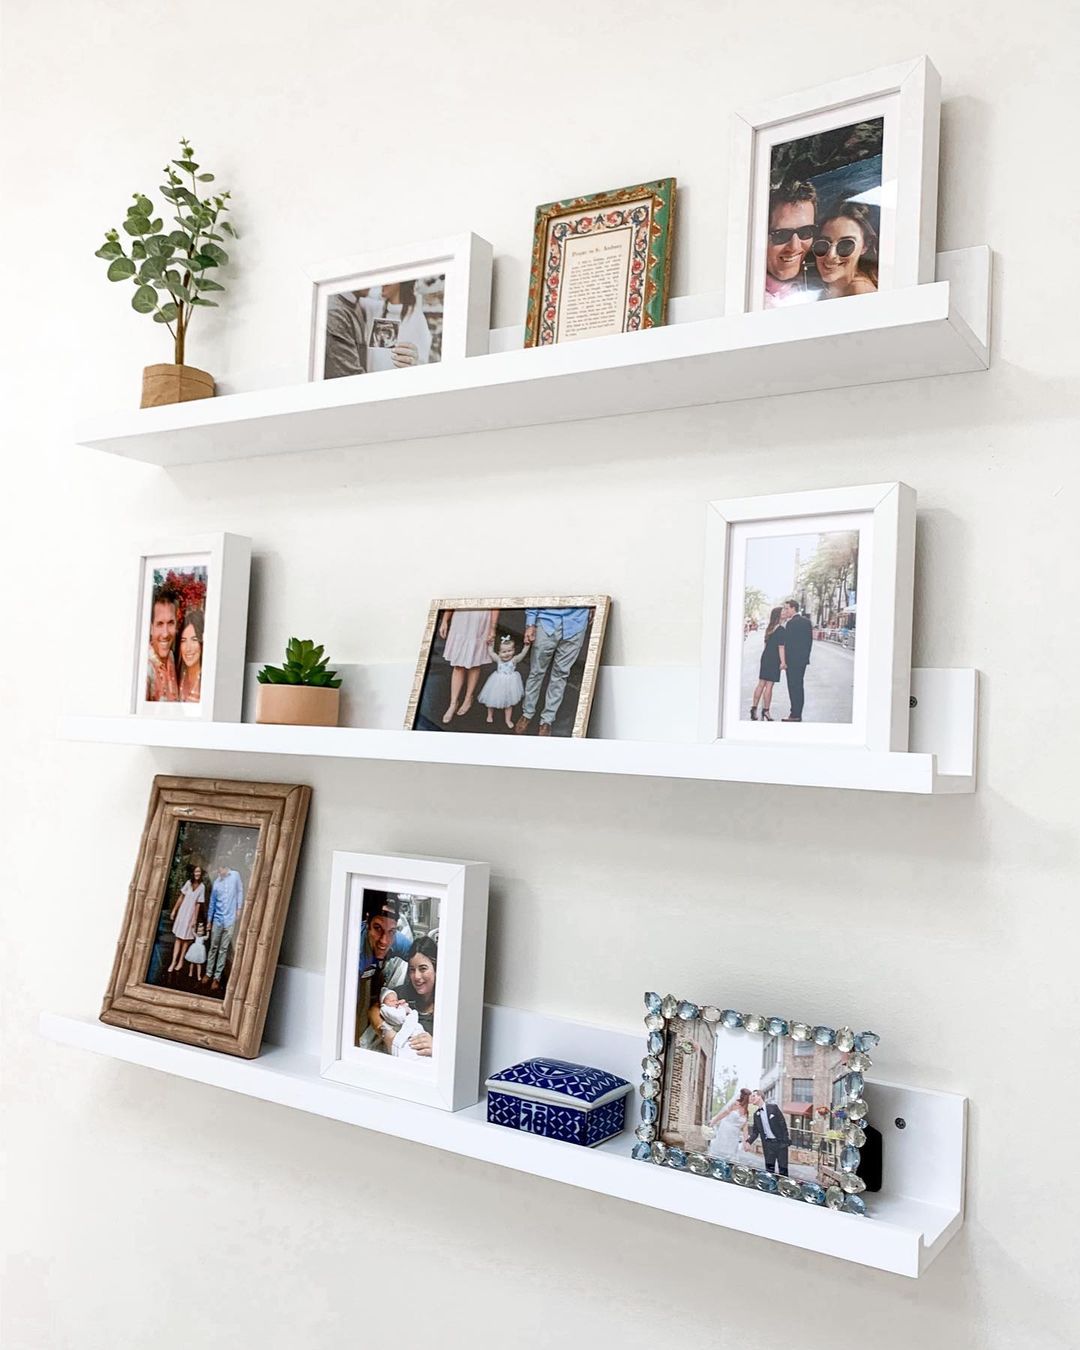 10. Personal Gallery on Minimalist Shelves